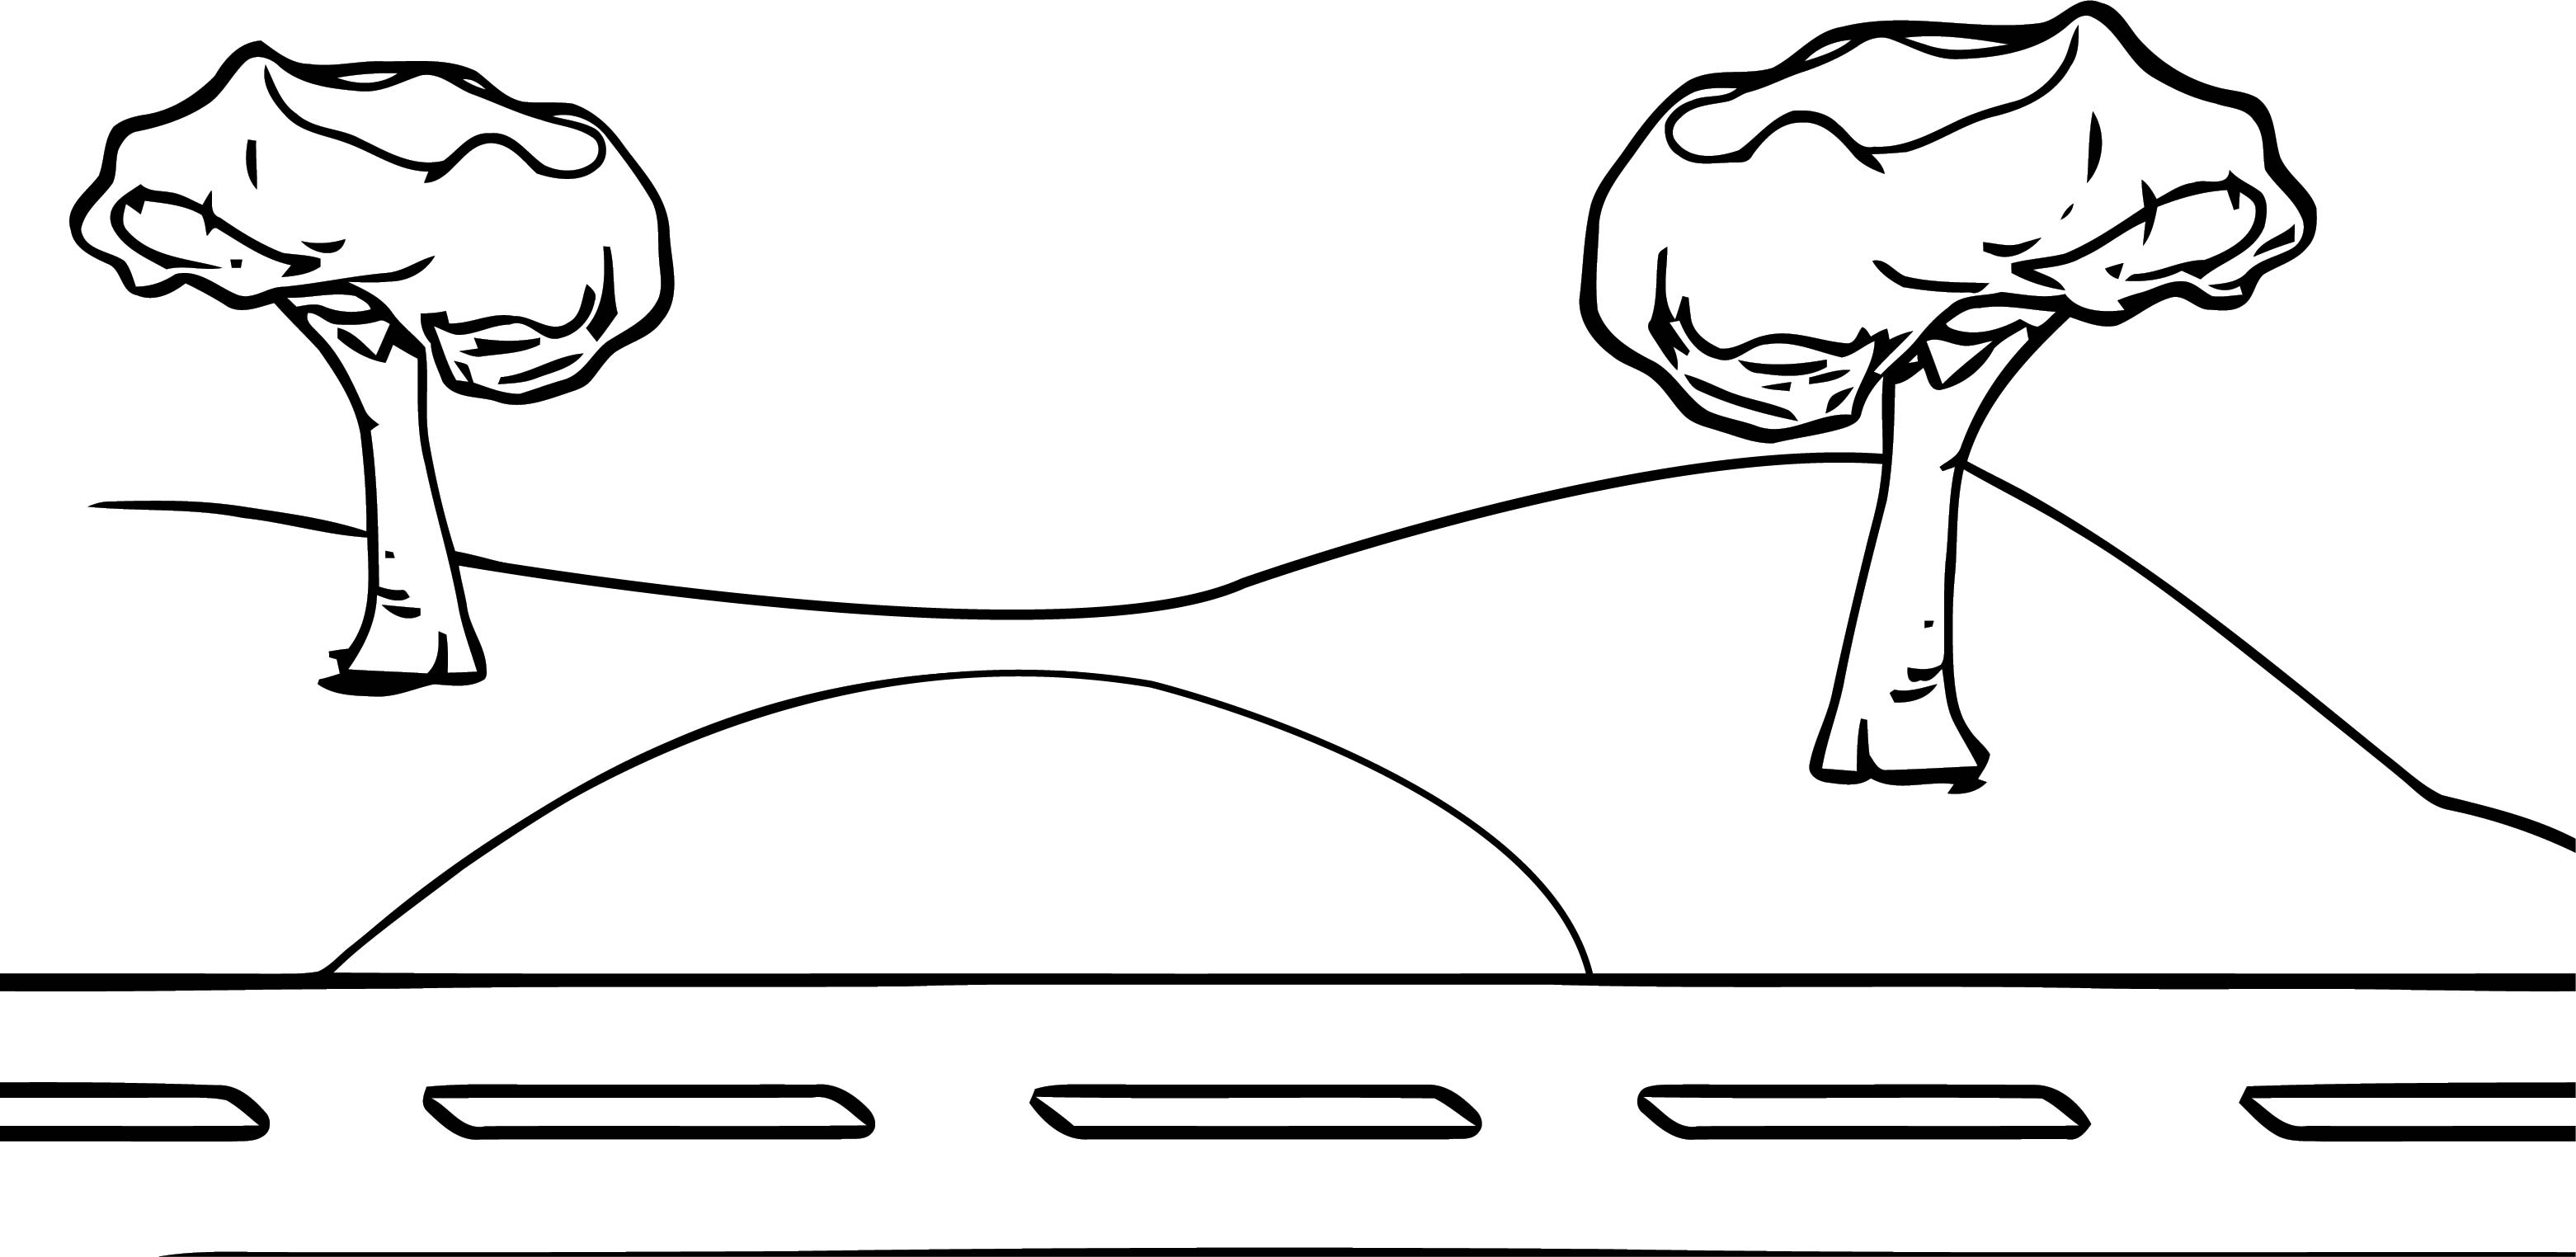 road coloring page road with landscape coloring page wecoloringpagecom coloring page road 